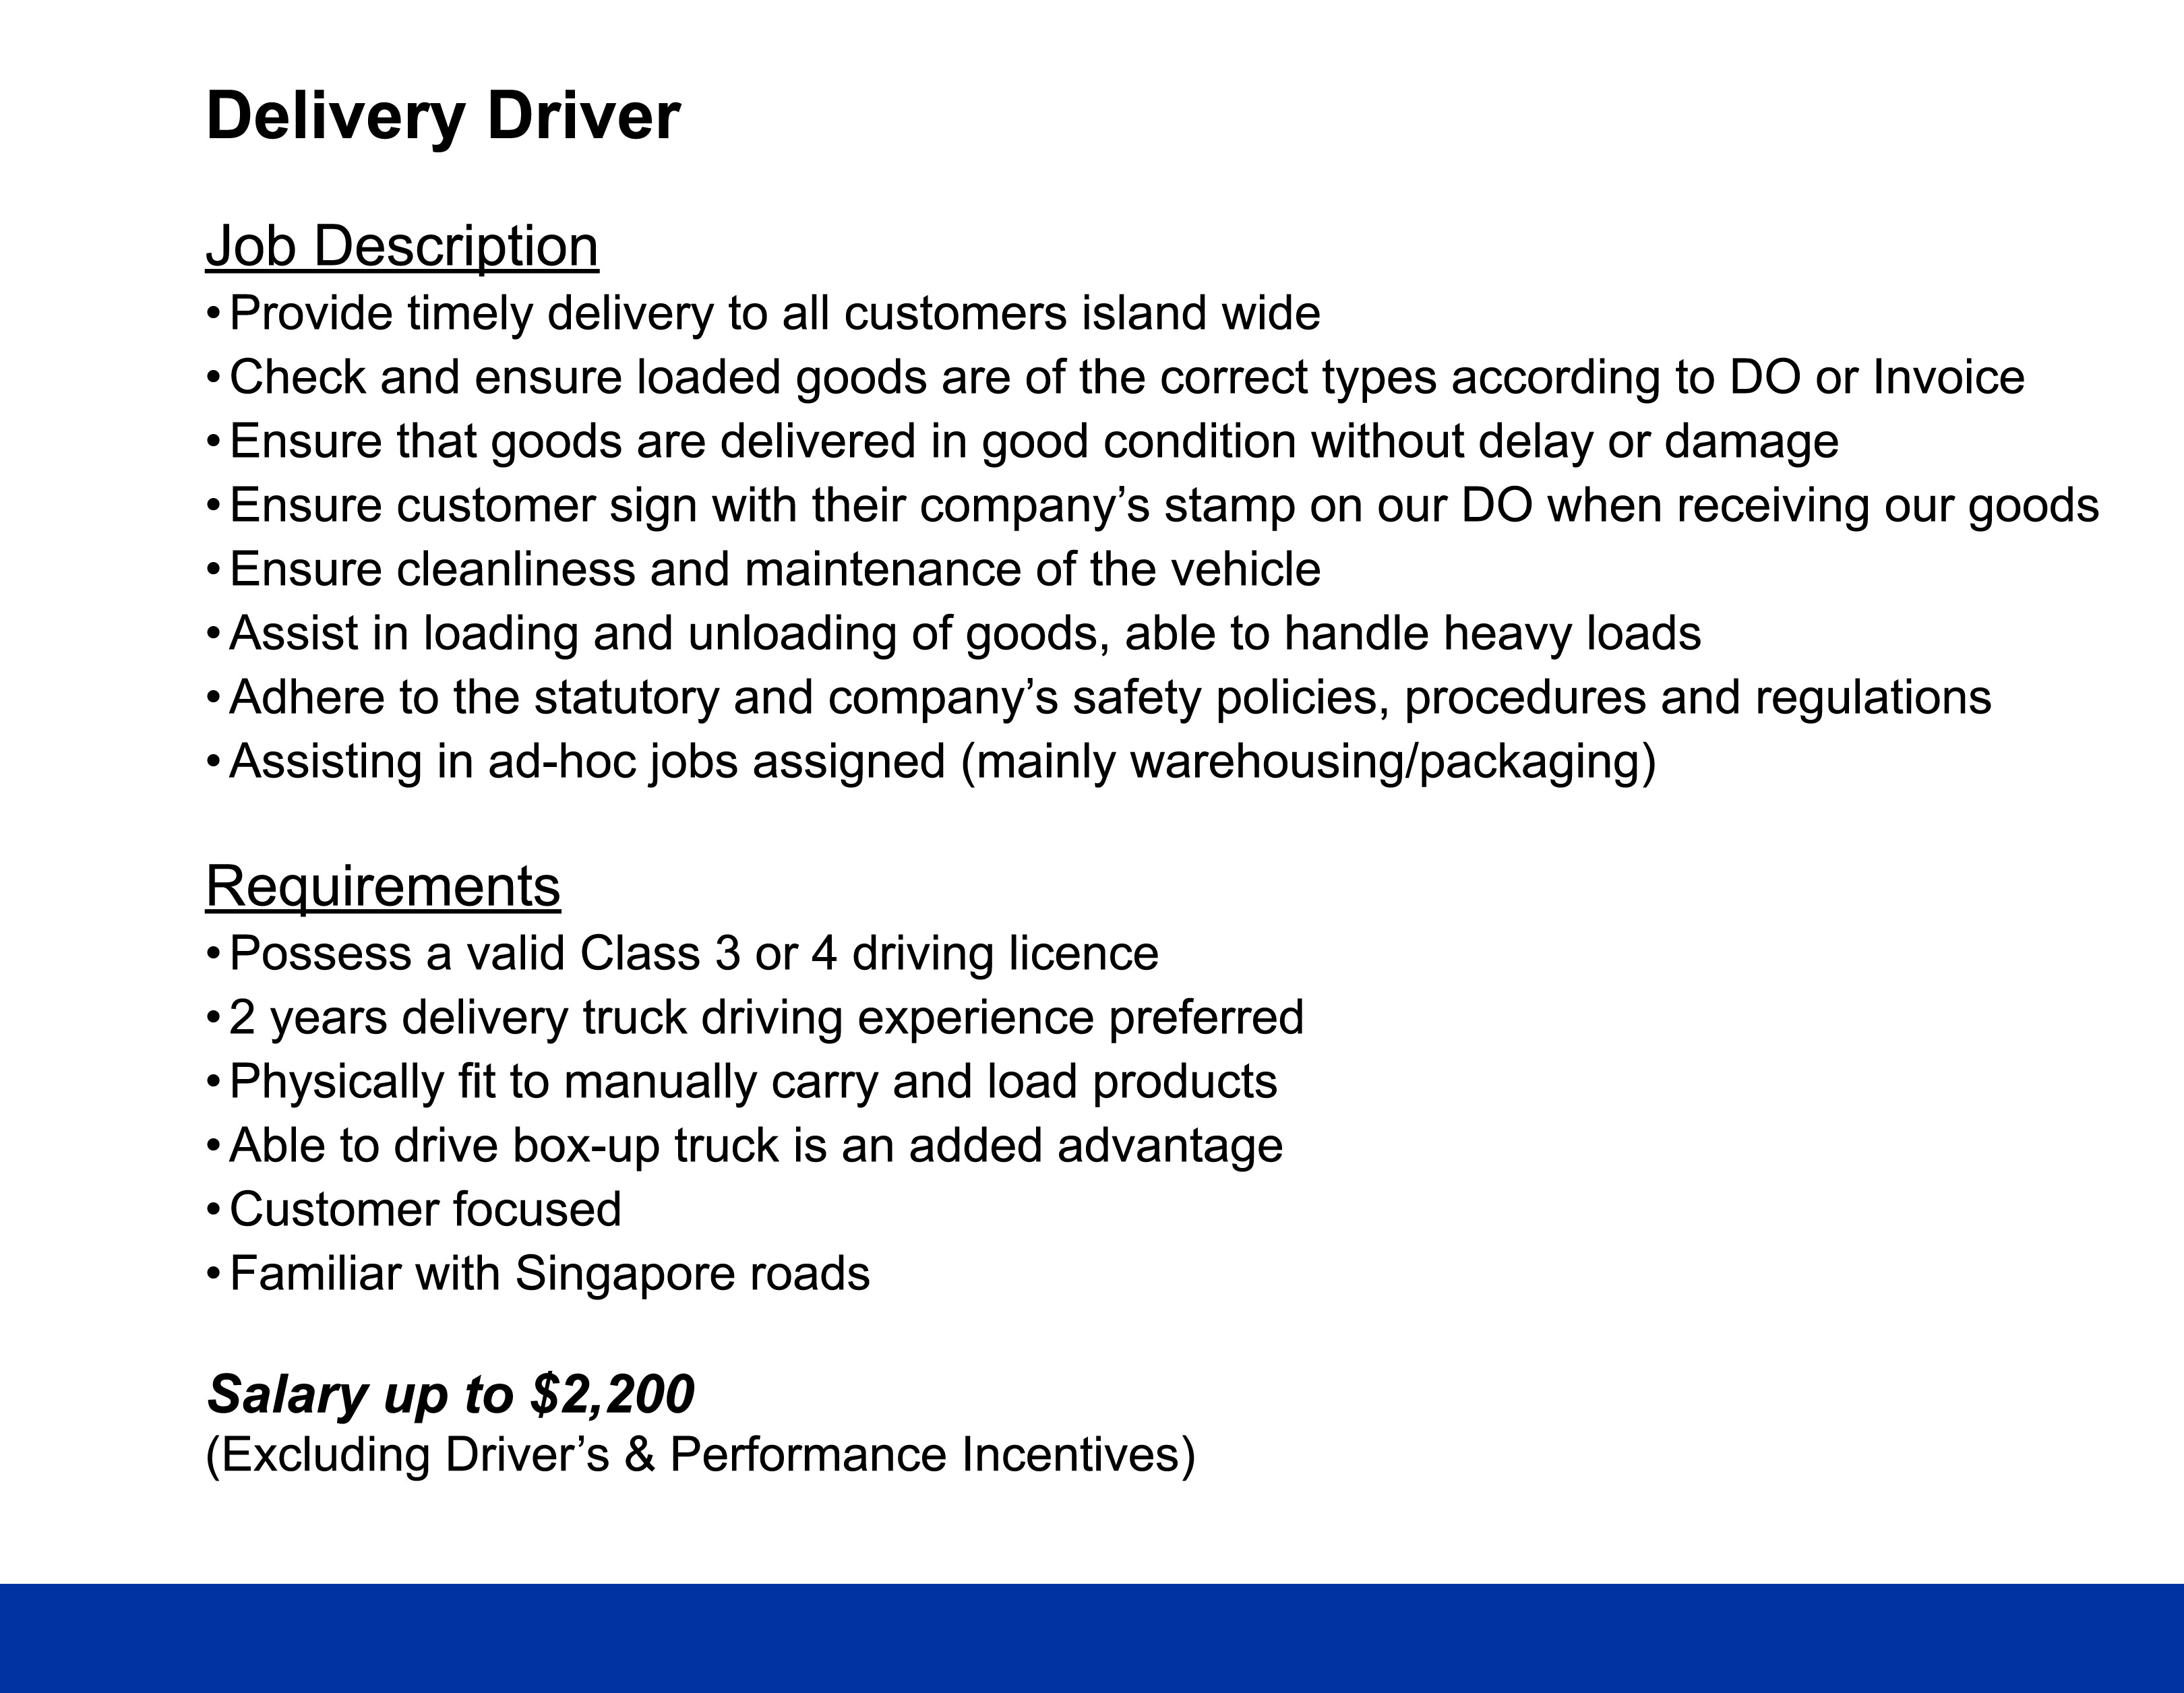 Recruitments_YMS_Delivery Driver